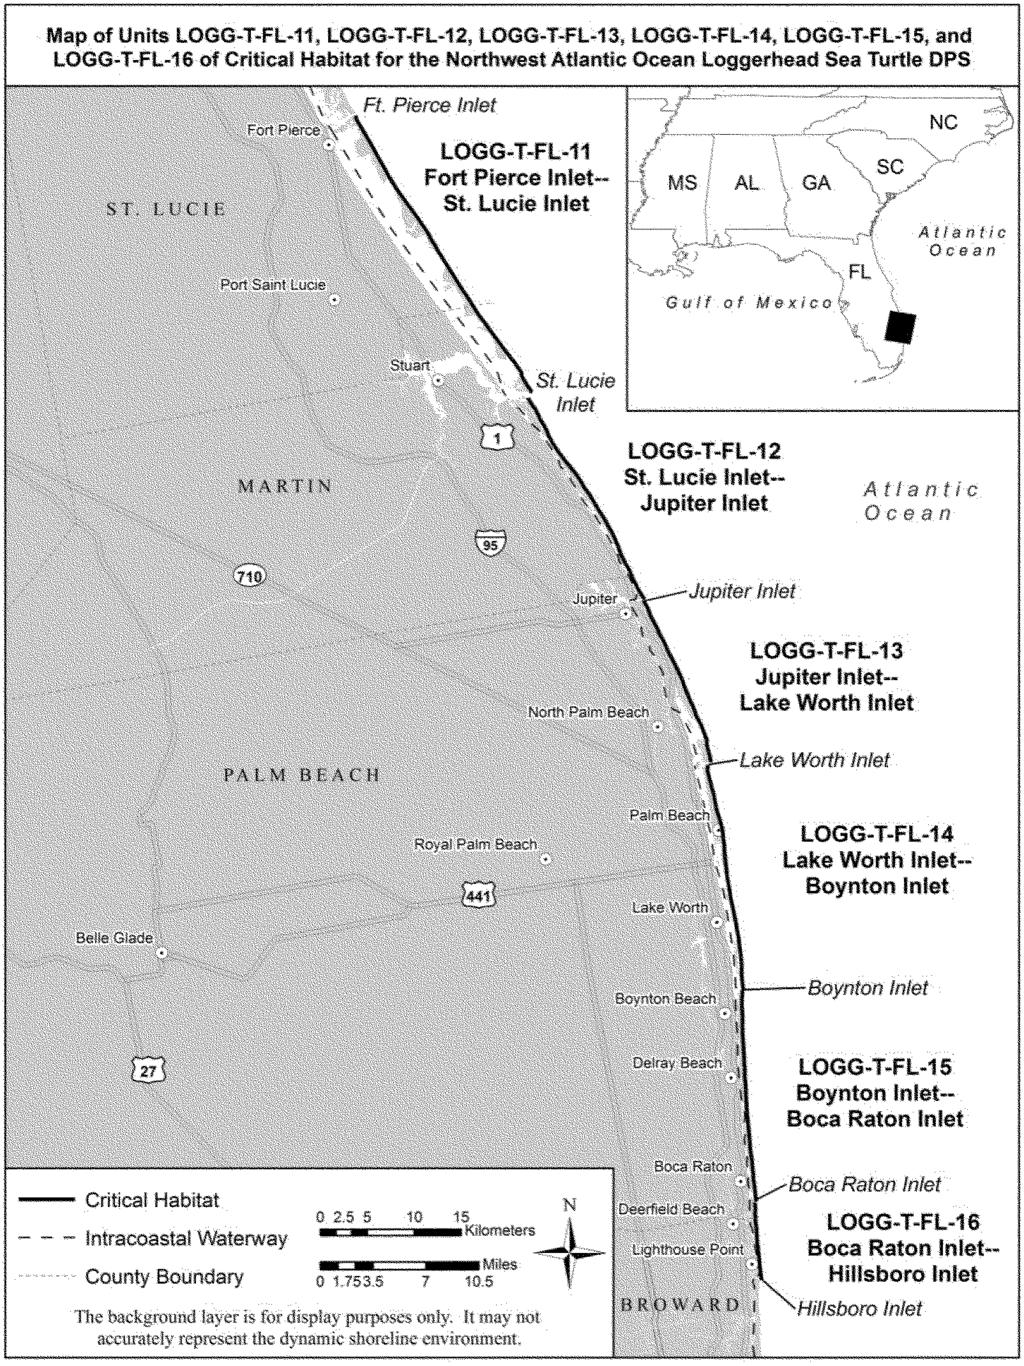 18066 Federal Register / Vol. 78, No. 57 / Monday, March 25, 2013 / Proposed Rules of 35.2 km (21.9 miles) of island shoreline along the Atlantic Ocean and extends from Fort Pierce Inlet to St.